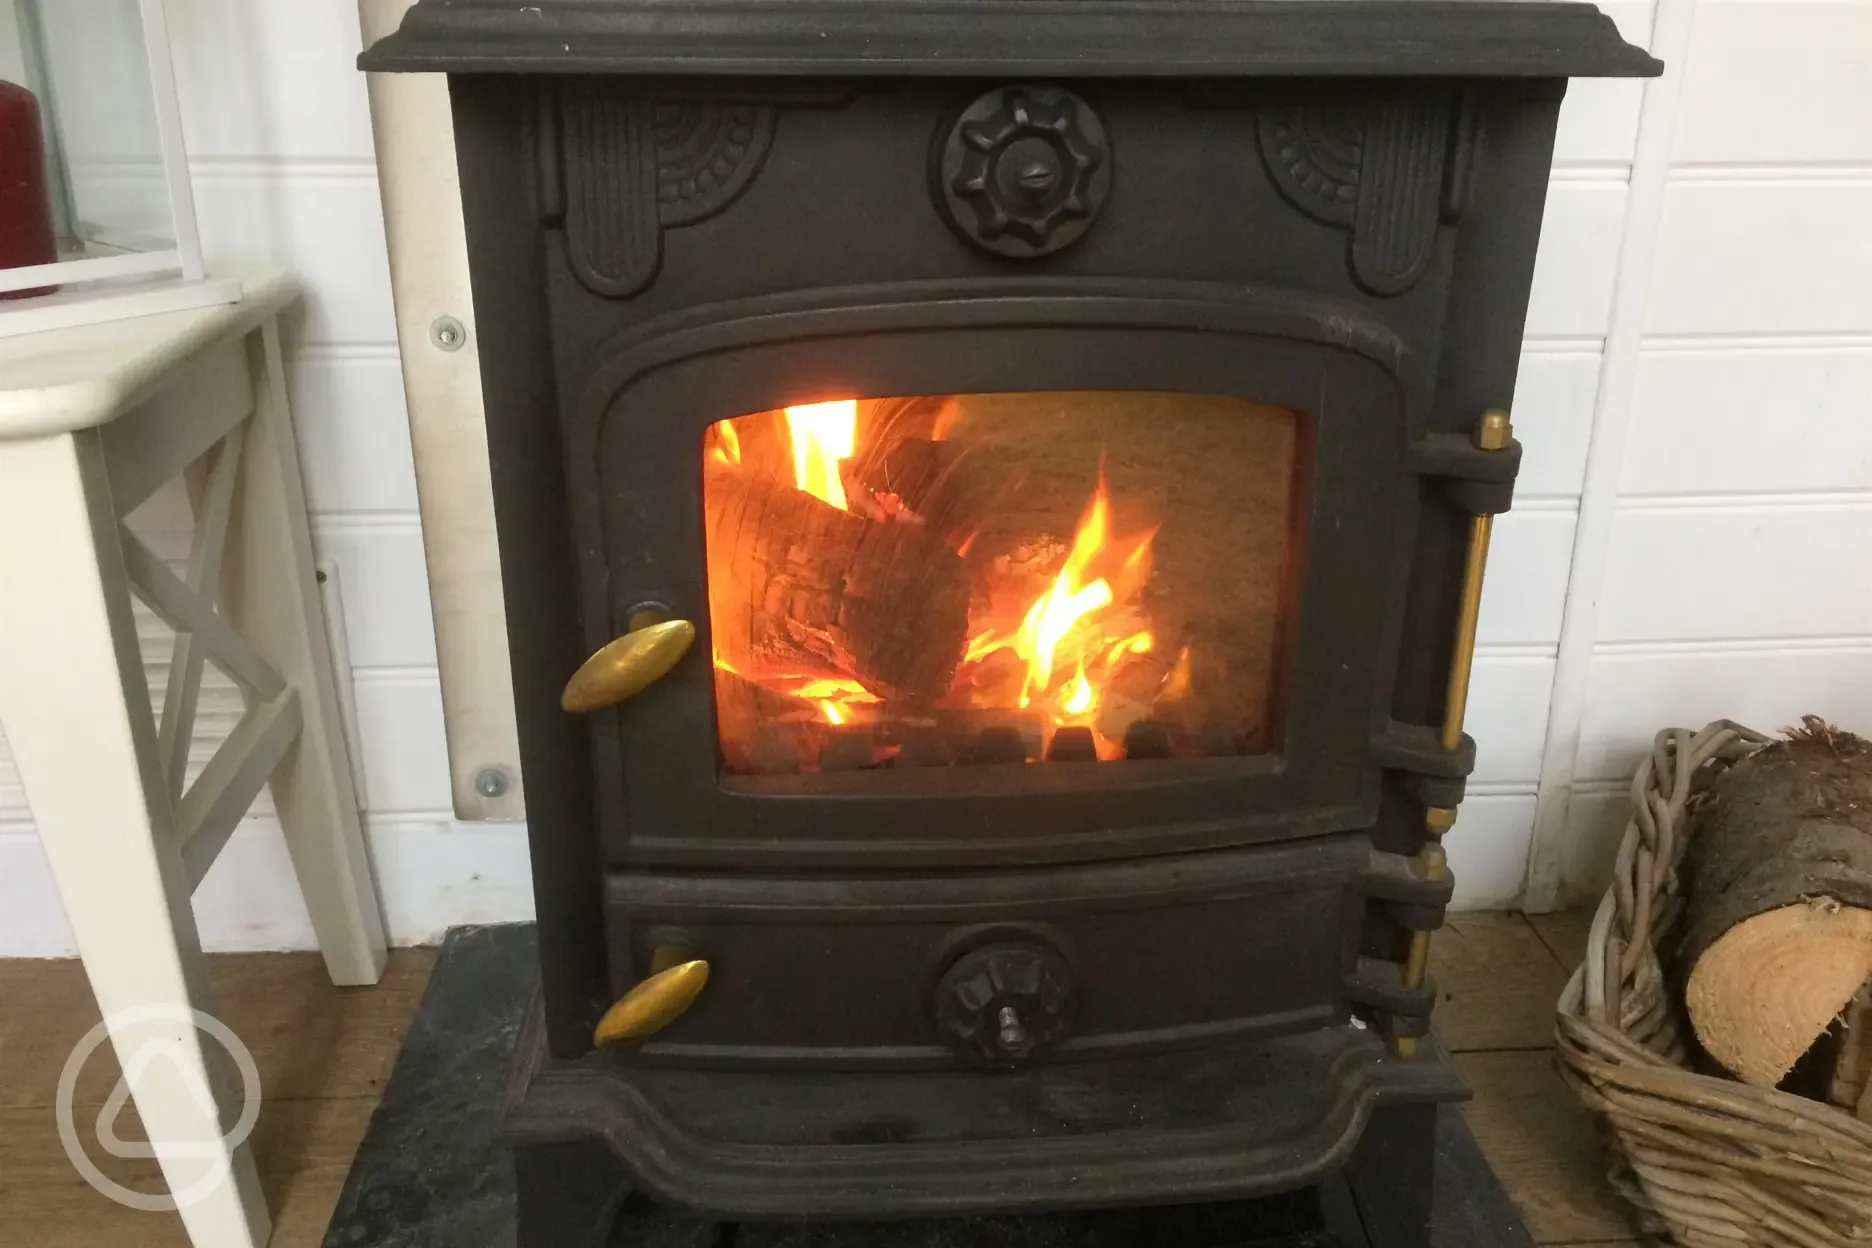 Cosy up at night in front of your own log burner